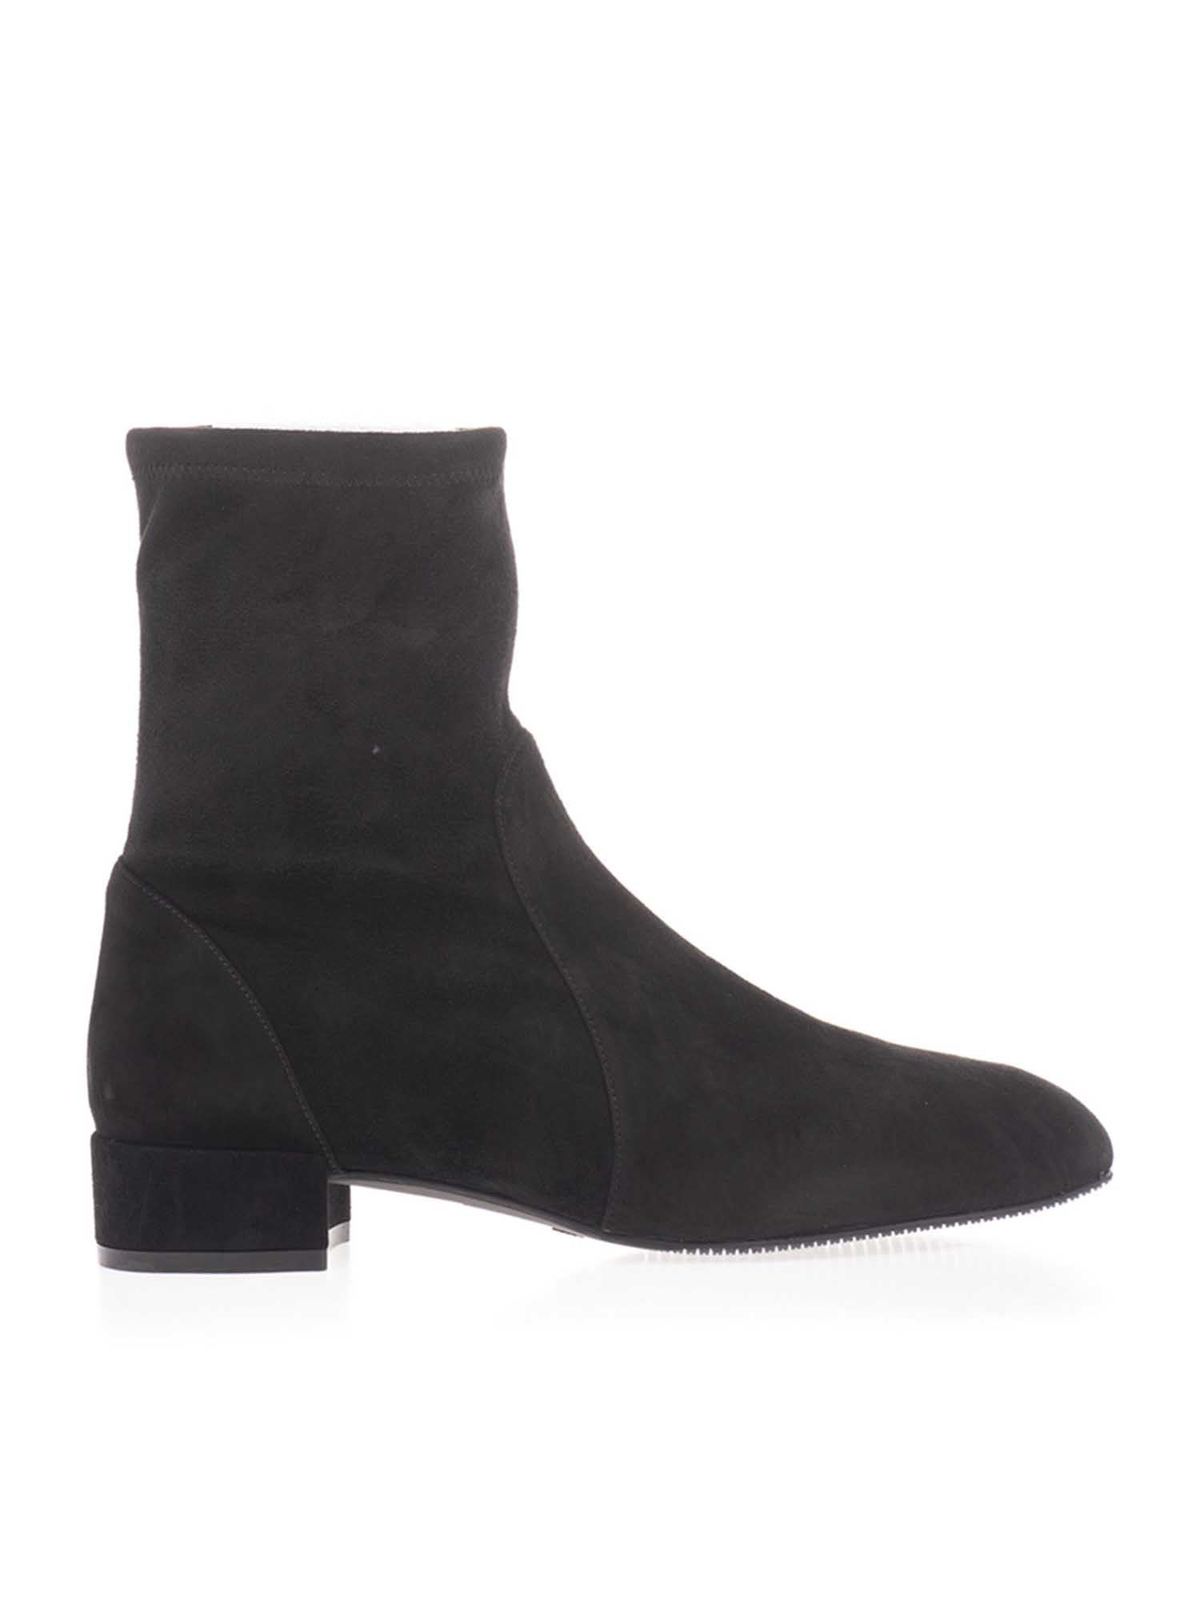 suede black ankle boots